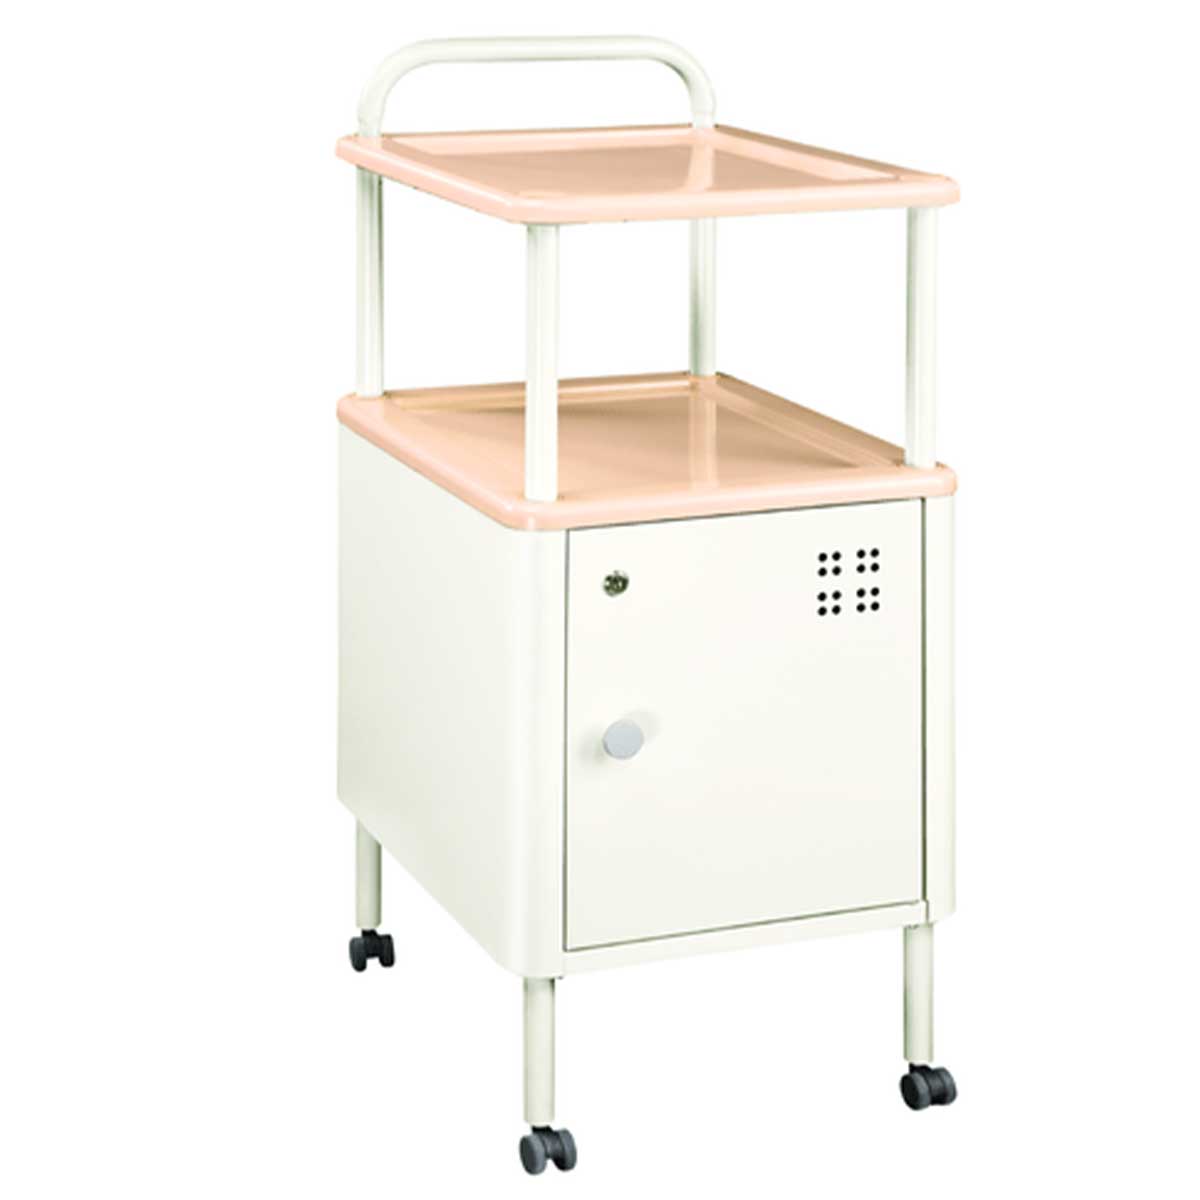 Laboratory Table Manufacturers, Suppliers in Mohan Nagar